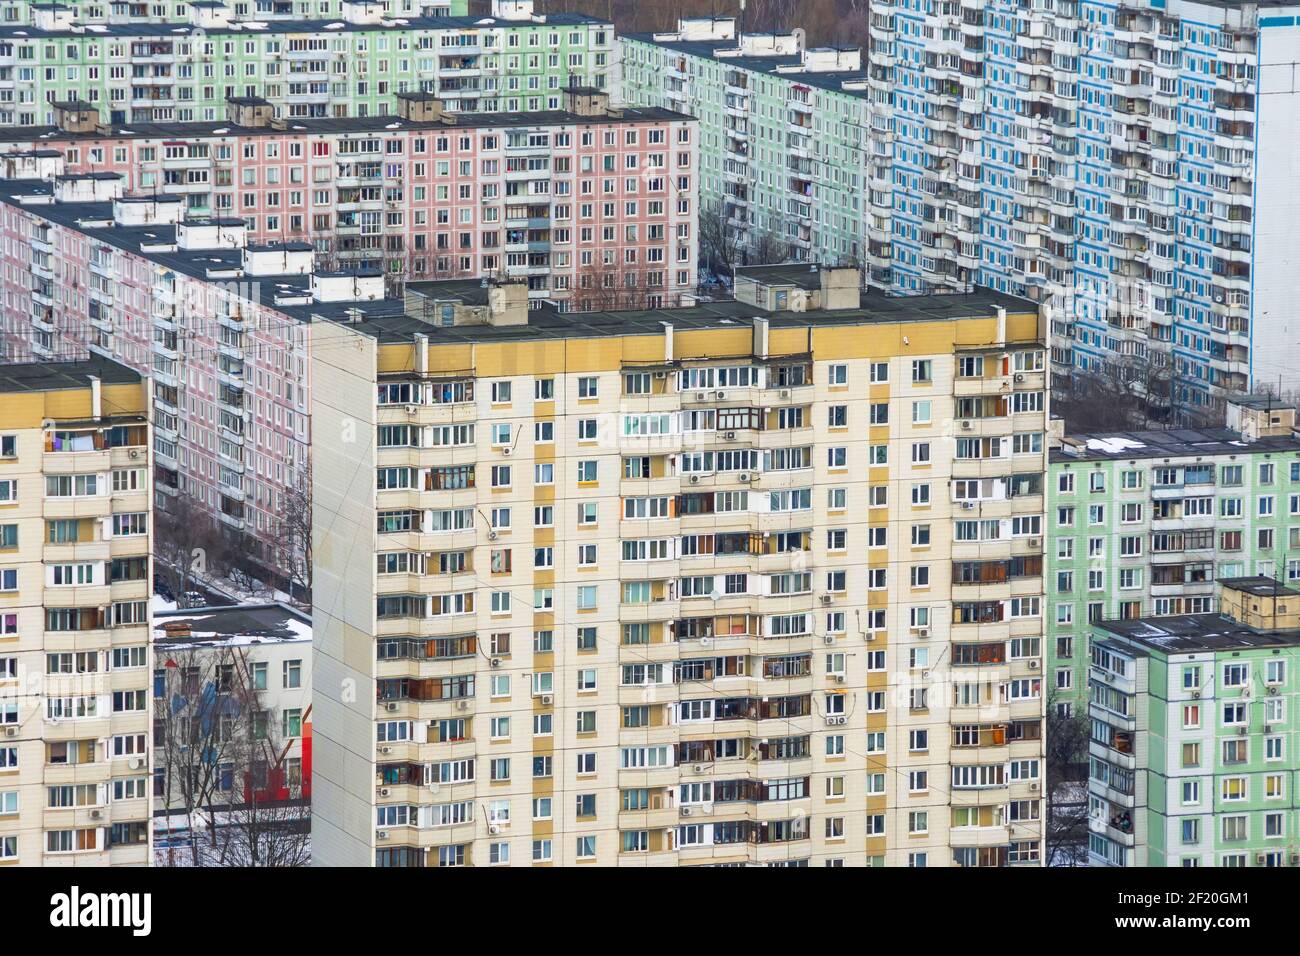 Multi-storey residential buildings made of concrete panels, sleeping areas of the metropolis Stock Photo